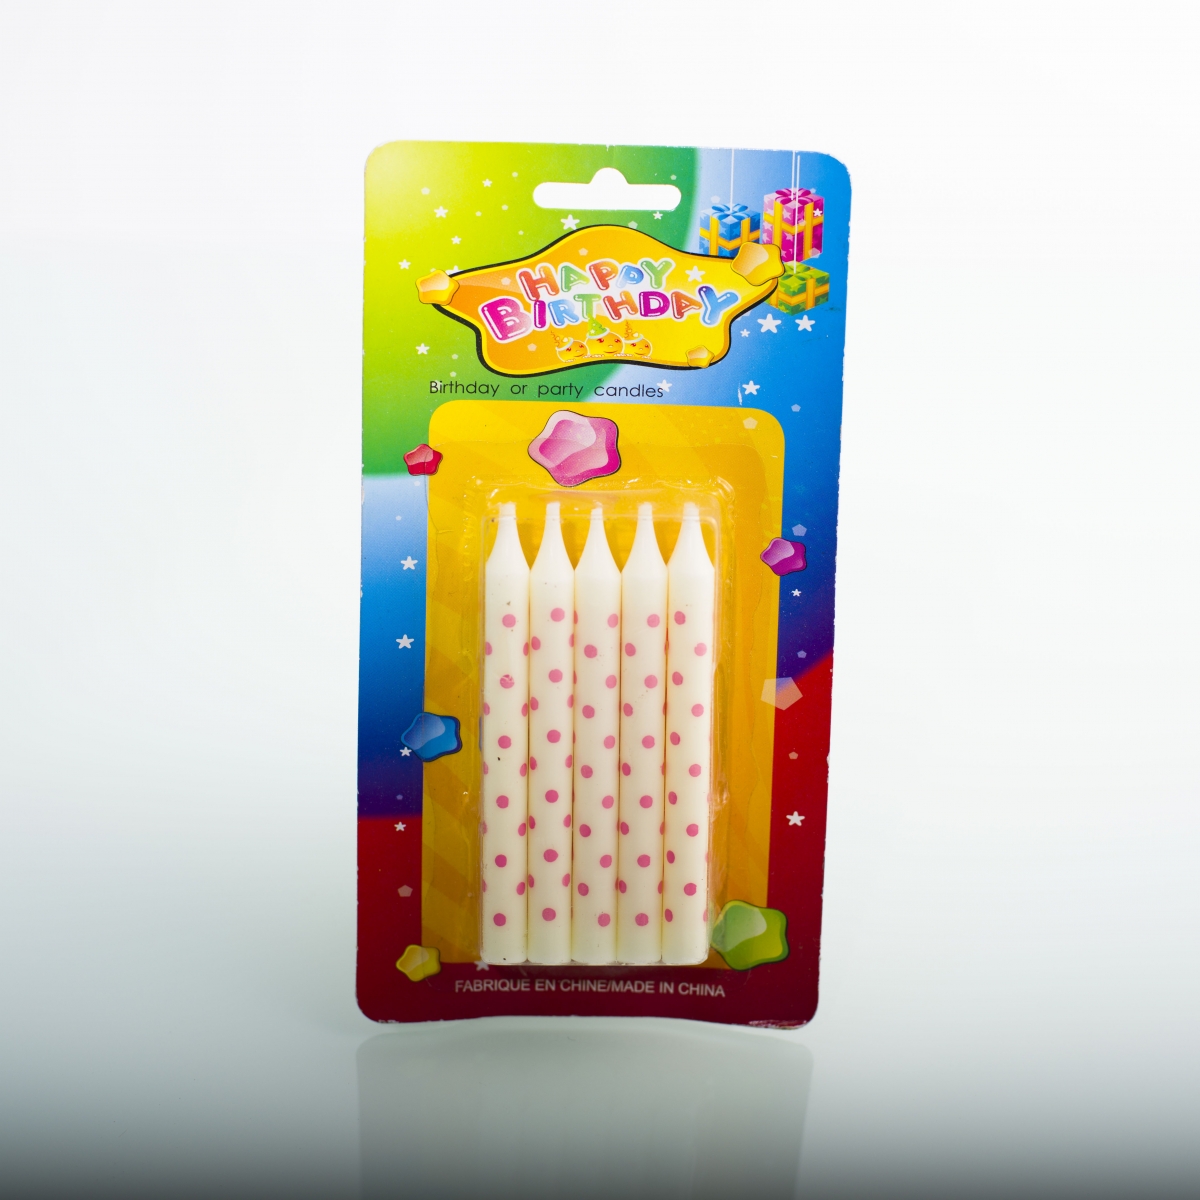 Birthday Cake Candles：Dots Printed, Small Size Taper Candle , Set 10 ,China Factory ,Wholesale ,Cheapest Price-HOWCANDLE-Candles,Scented Candles,Aromatherapy Candles,Soy Candles,Vegan Candles,Jar Candles,Pillar Candles,Candle Gift Sets,Essential Oils,Reed Diffuser,Candle Holder,